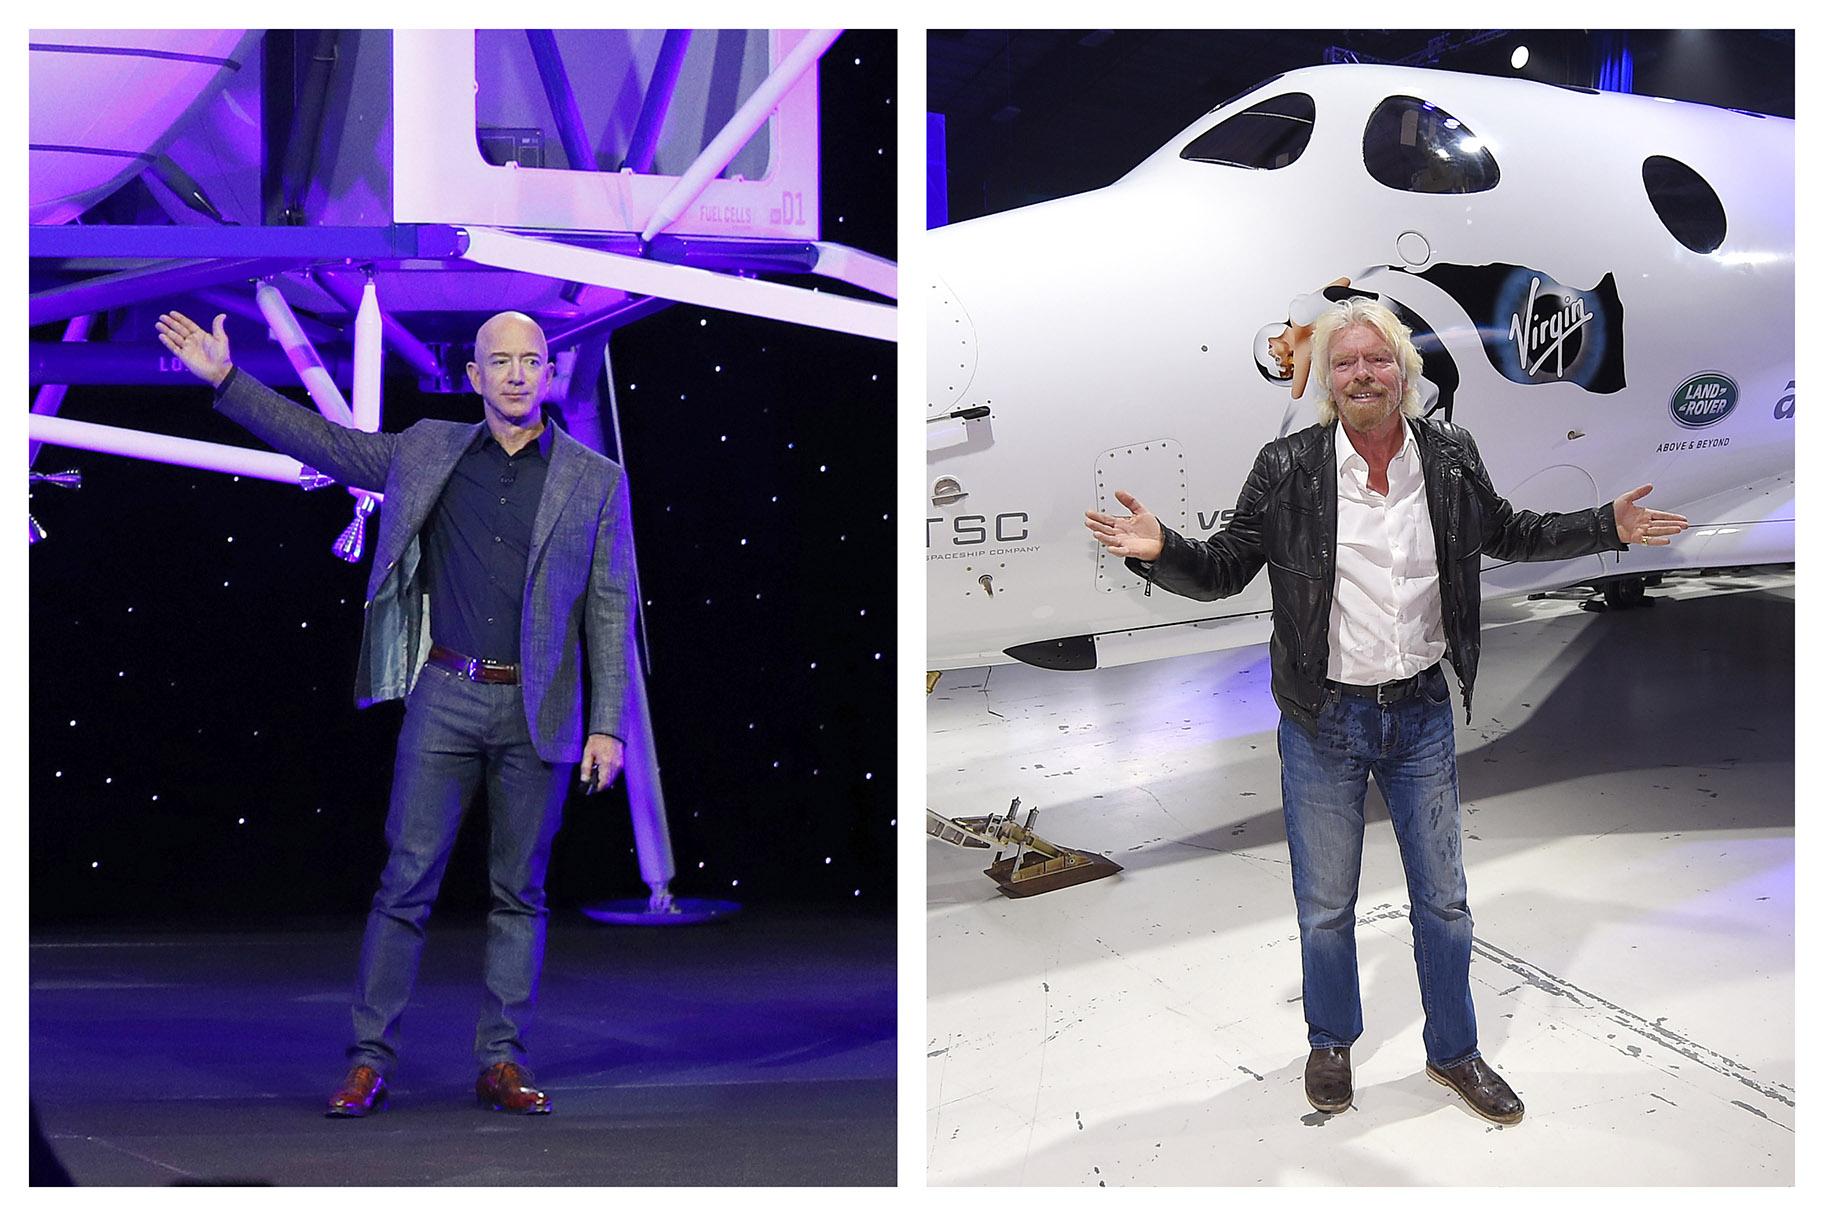 This combination of 2019 and 2016 file photos shows Jeff Bezos with a model of Blue Origin’s Blue Moon lunar lander in Washington, left, and Richard Branson with Virgin Galactic’s SpaceShipTwo space tourism rocket in Mojave, Calif. (AP Photo / Patrick Semansky, Mark J. Terrill)